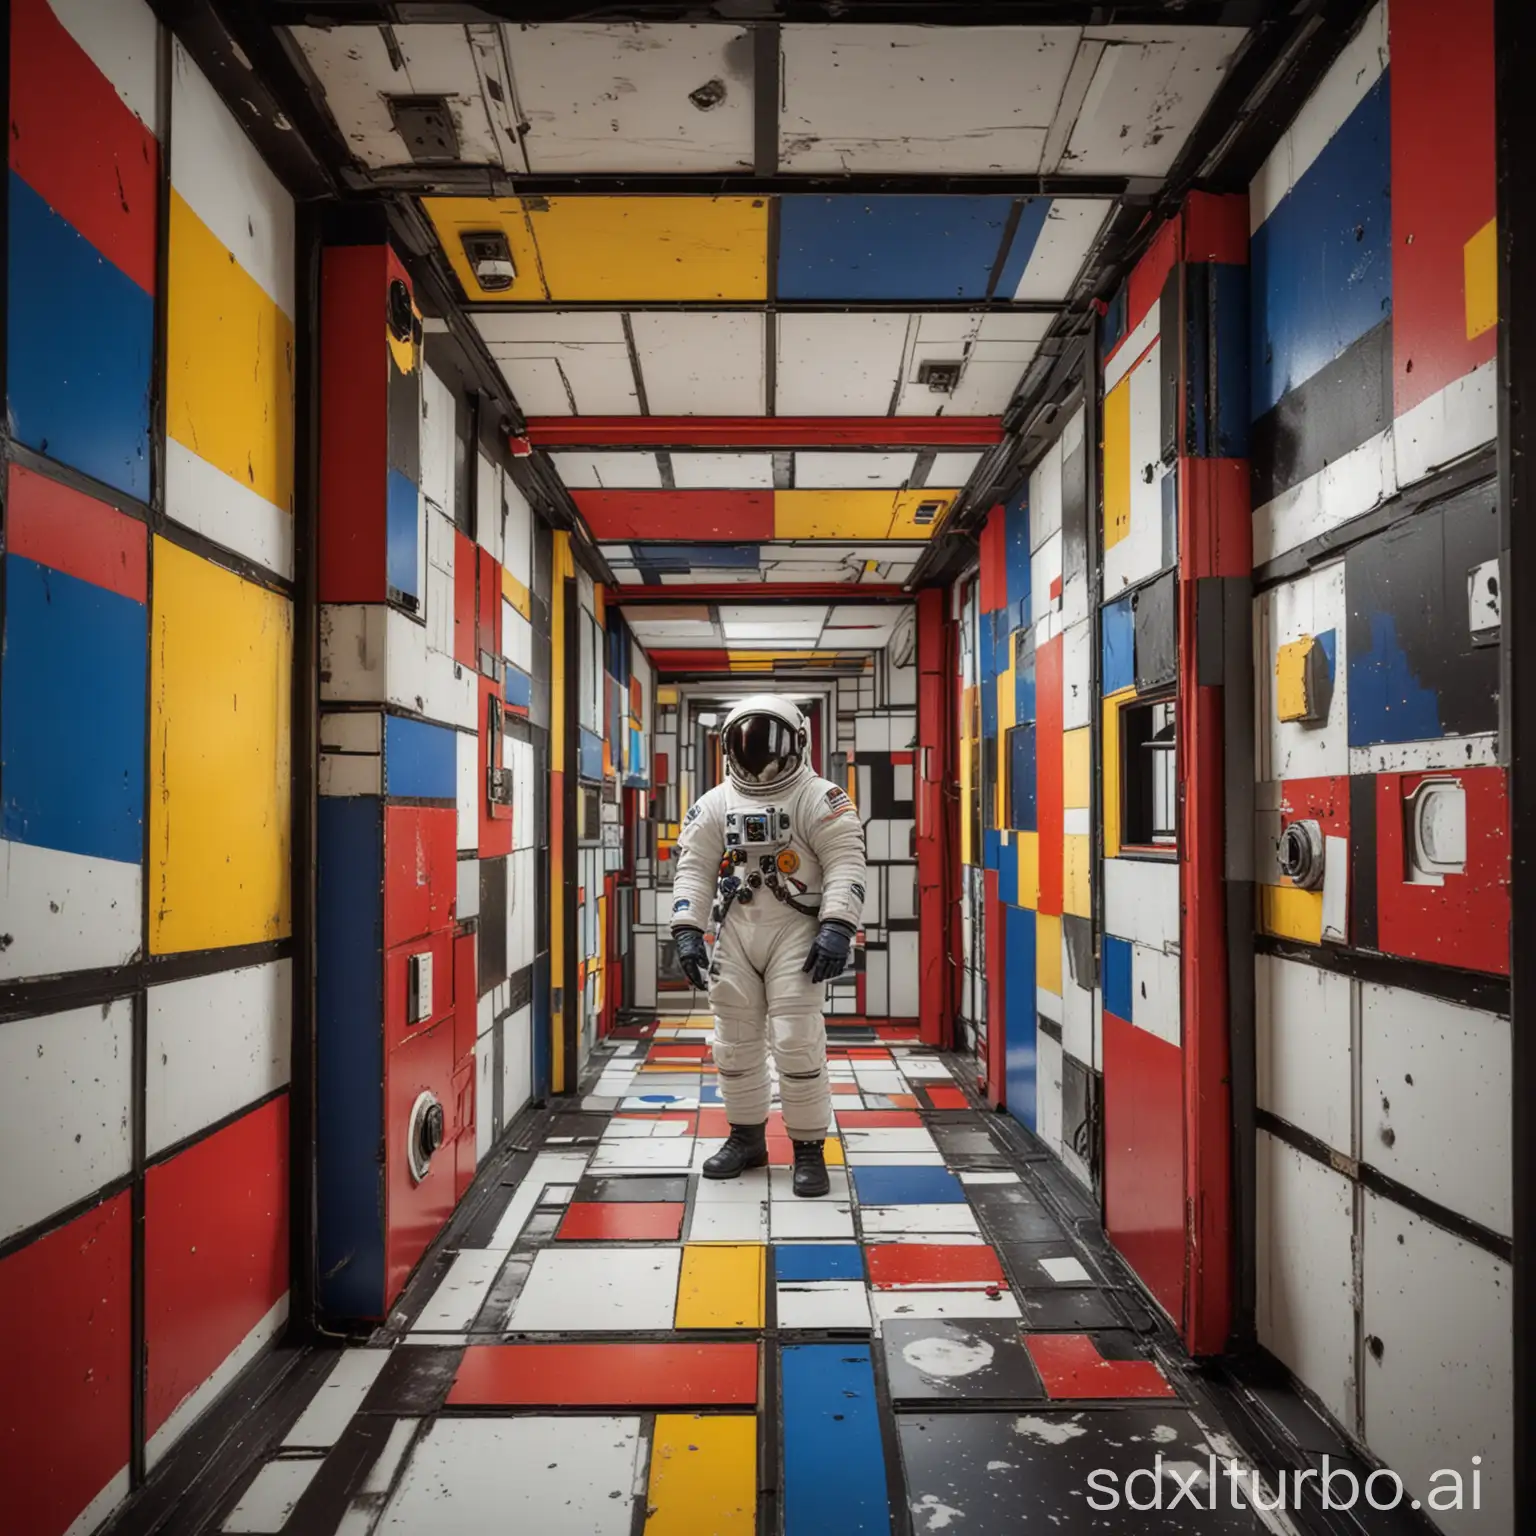 An astronaut is in a Mondrian-style space station, whose walls are made up of red, yellow, blue and black straight lines and rectangles. The astronaut opens the window and sees a universe conceived by a Cubist artist, with planets and nebulae presented in geometric shapes and bright colors, creating a visual effect that combines minimalism with science fiction.